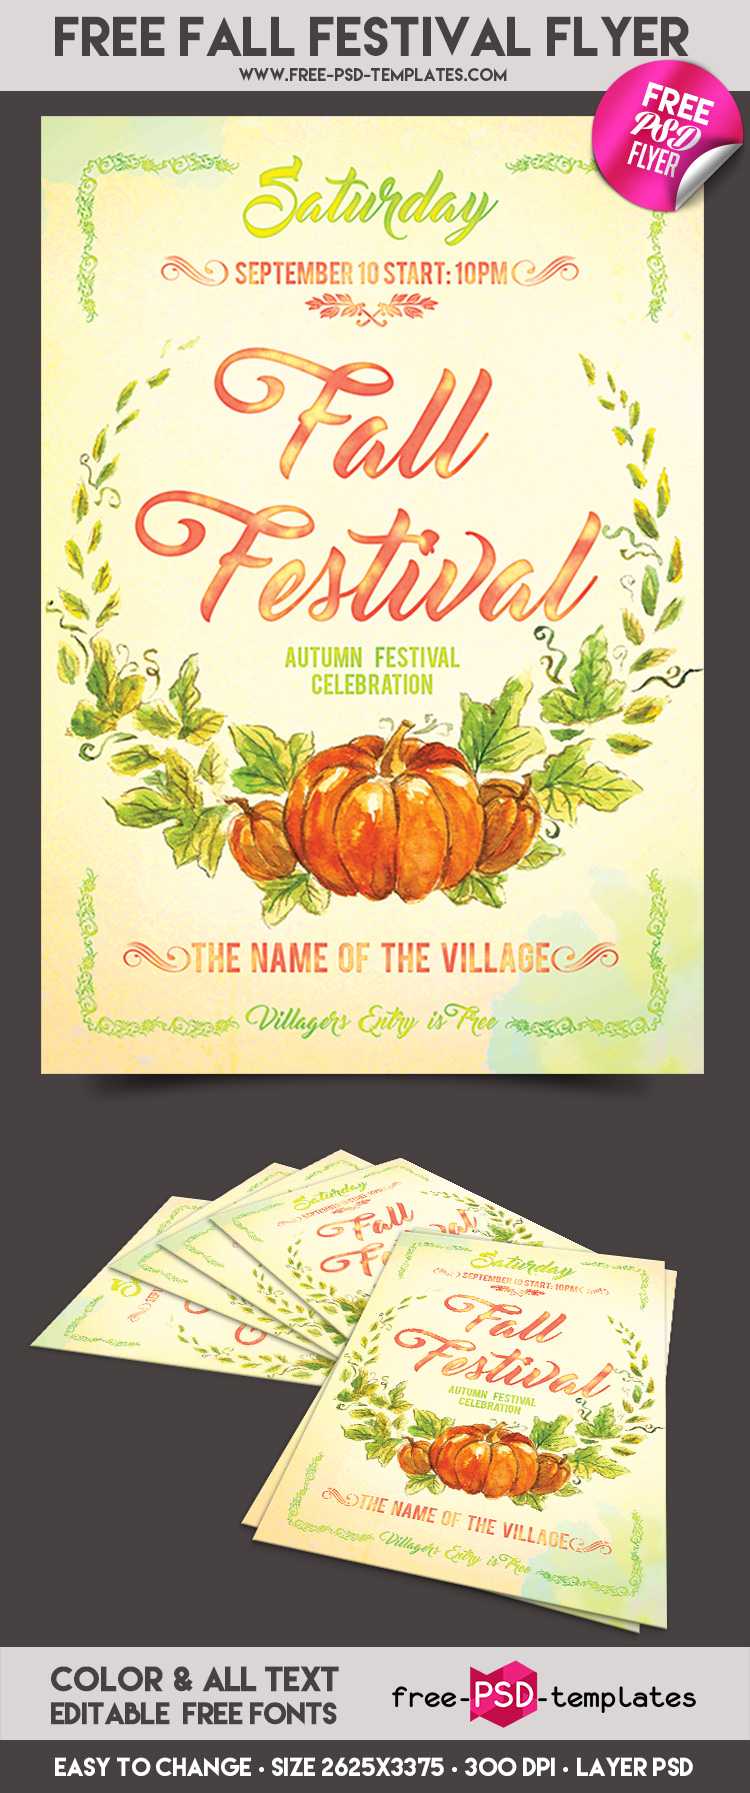 Free Fall Festival Flyer In Psd | Free Psd Templates In Fall Festival Flyer Templates Free